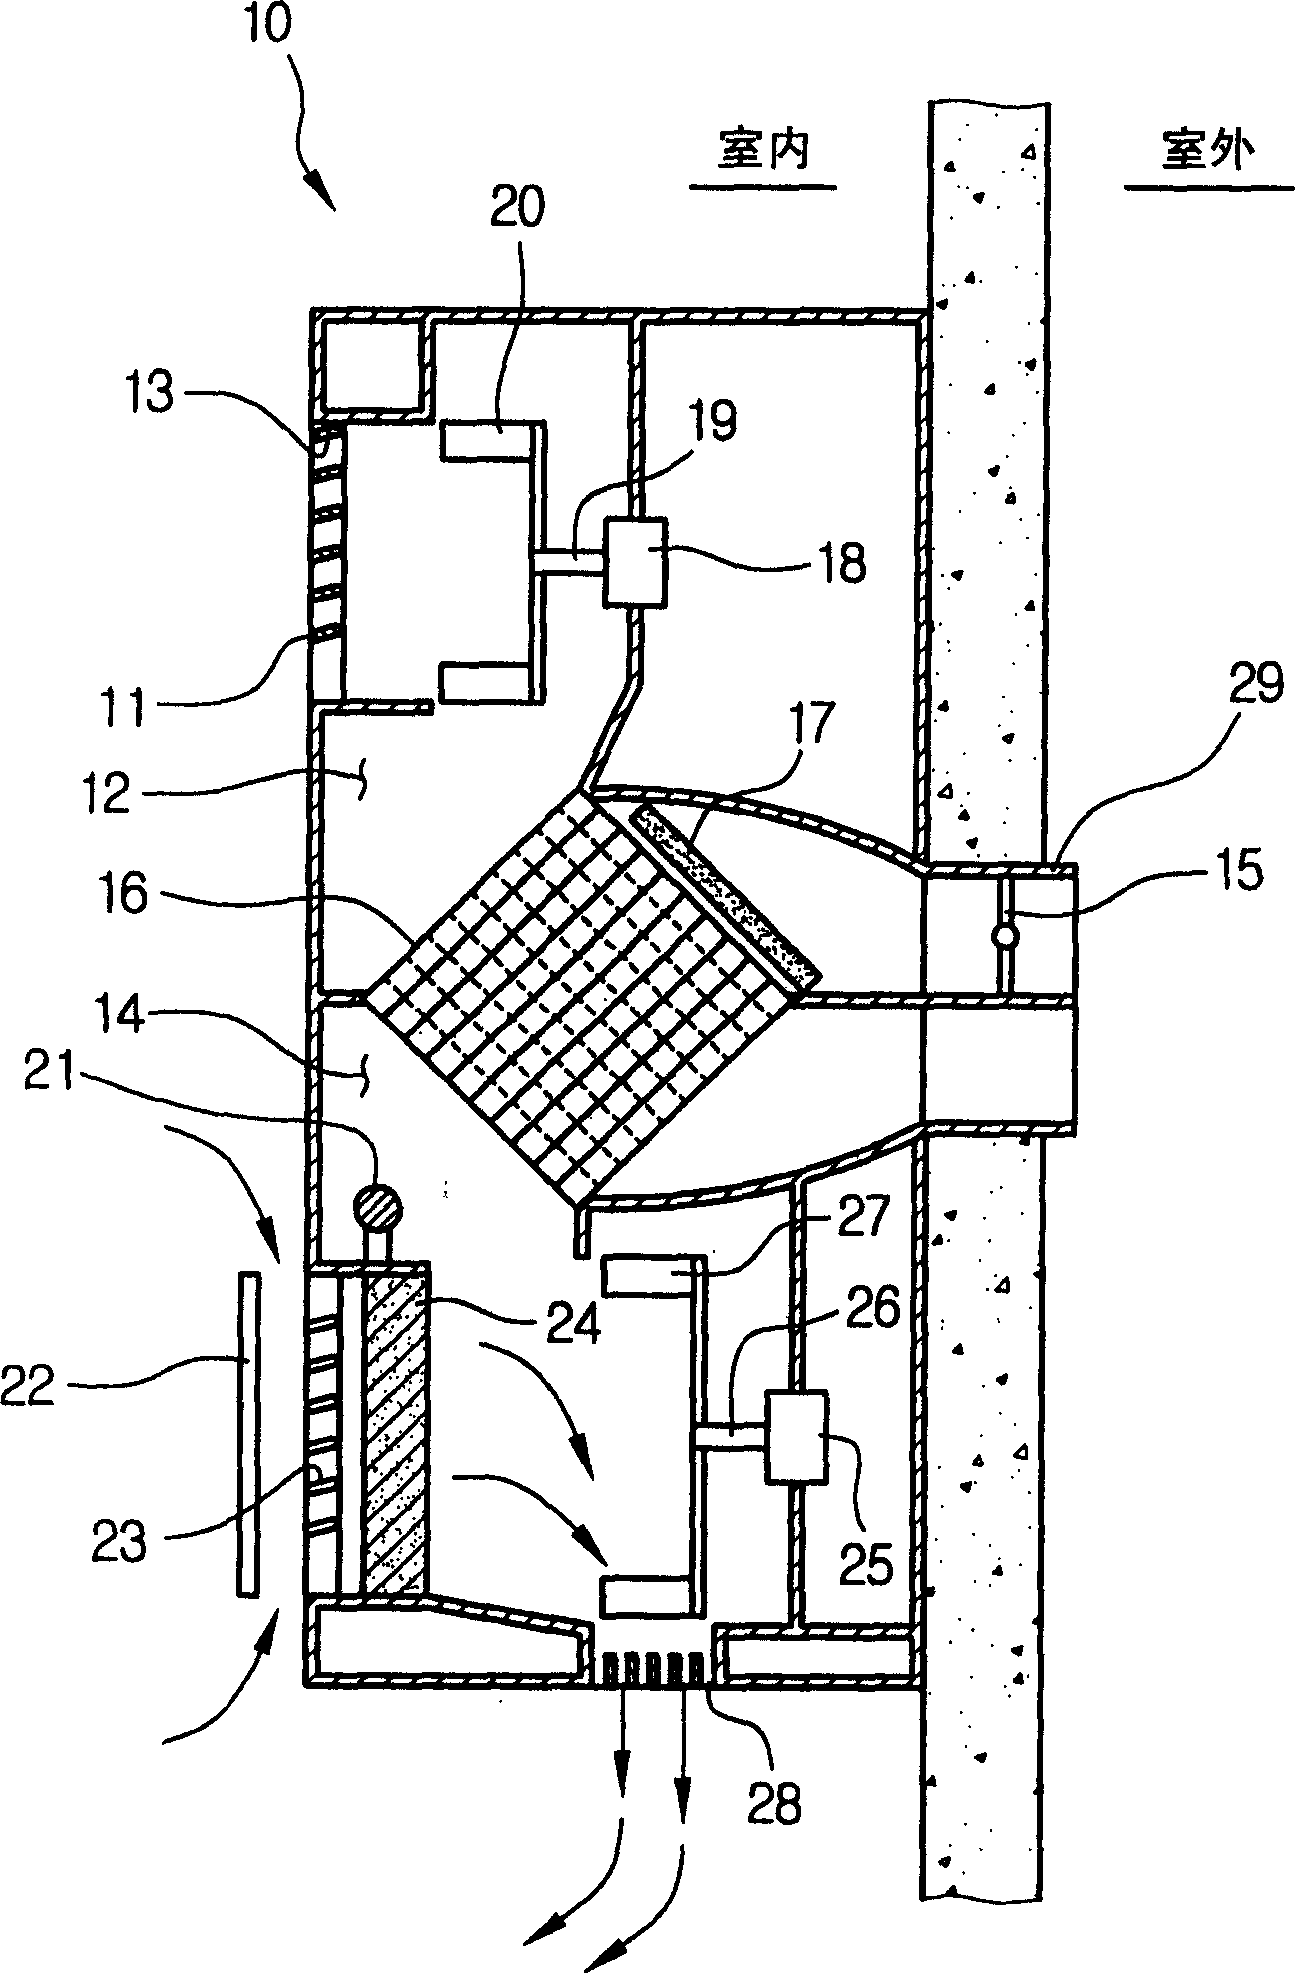 Air purifying system and control method thereof